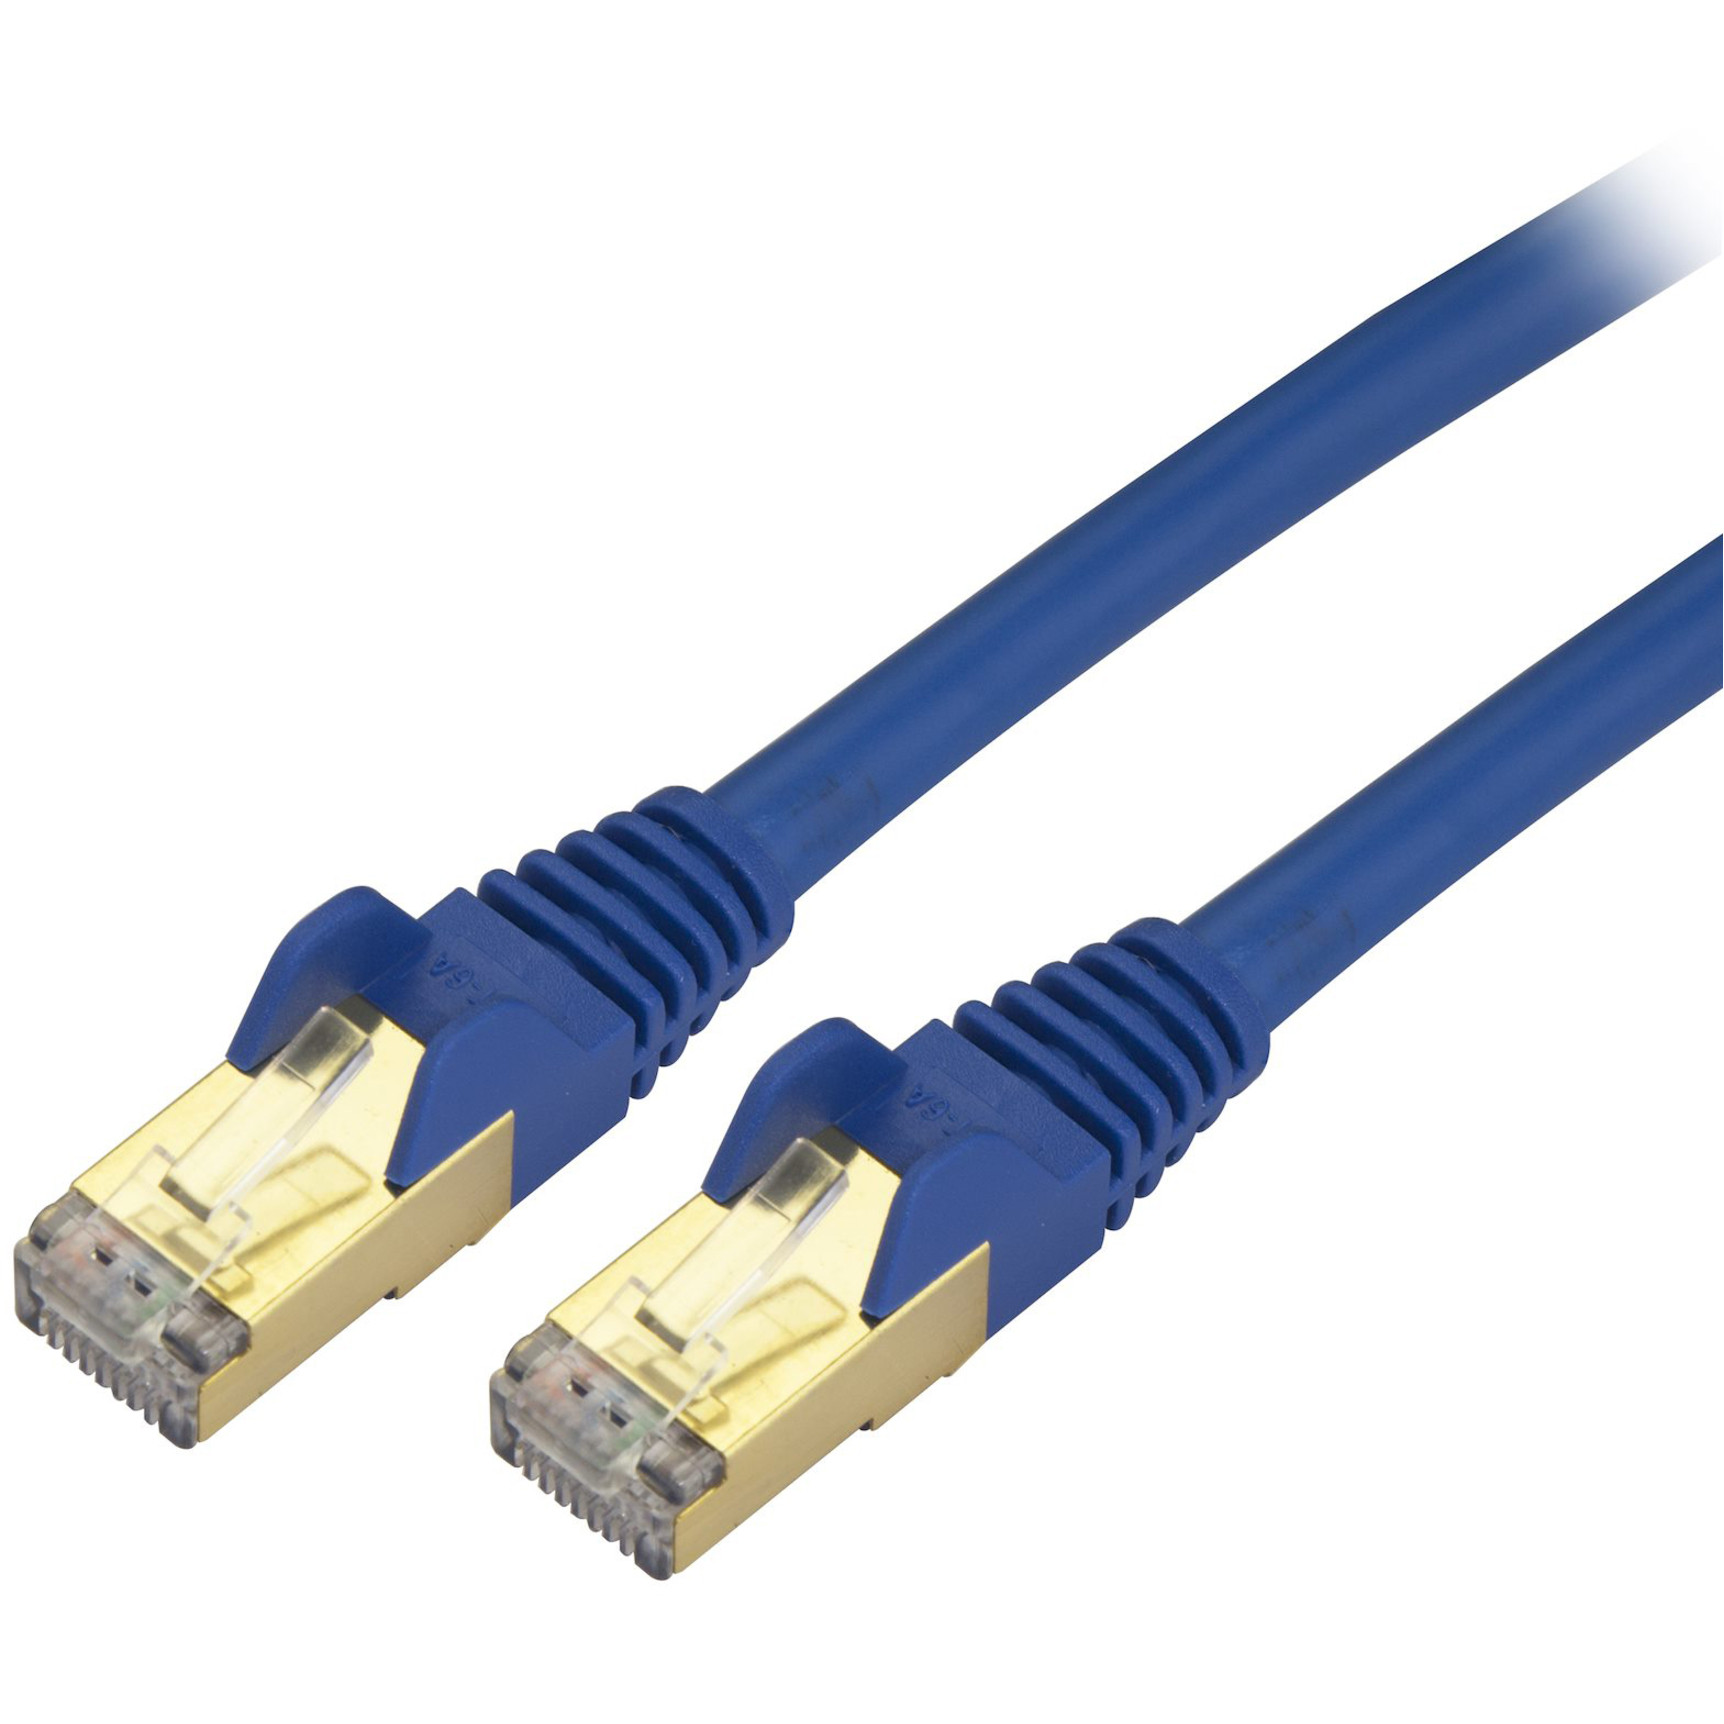 Startech .com 15ft CAT6a Ethernet Cable10 Gigabit Category 6a Shielded Snagless 100W PoE Patch Cord10GbE Blue UL Certified Wiring/TIA -… C6ASPAT15BL